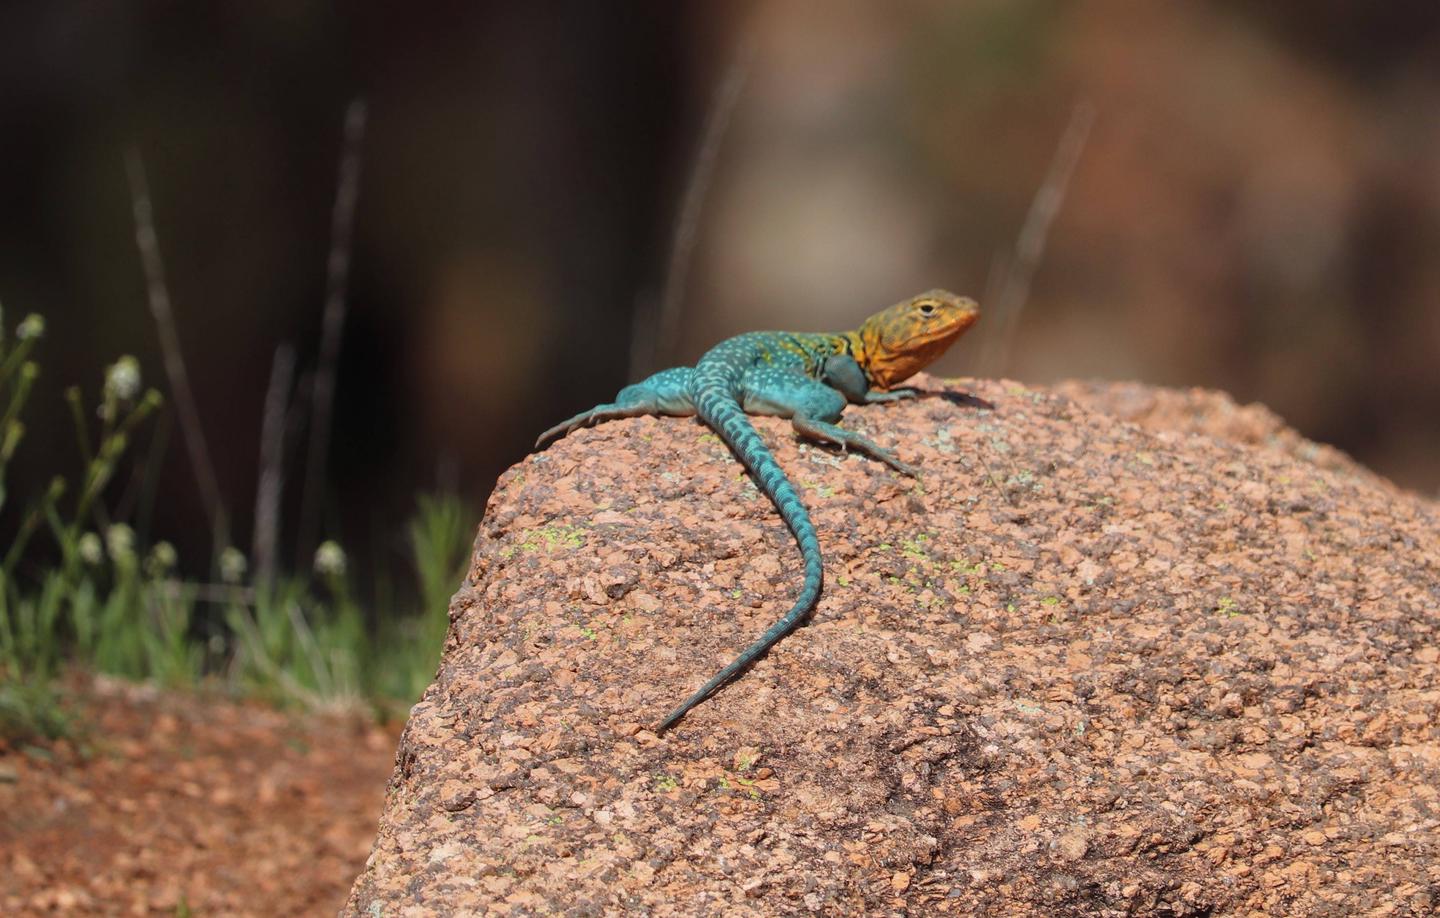 A colorful lizard sits atop a boulder.Wichita Mountains is home to a variety of creatures including the colorful eastern collared lizard (Crotaphytus collaris).